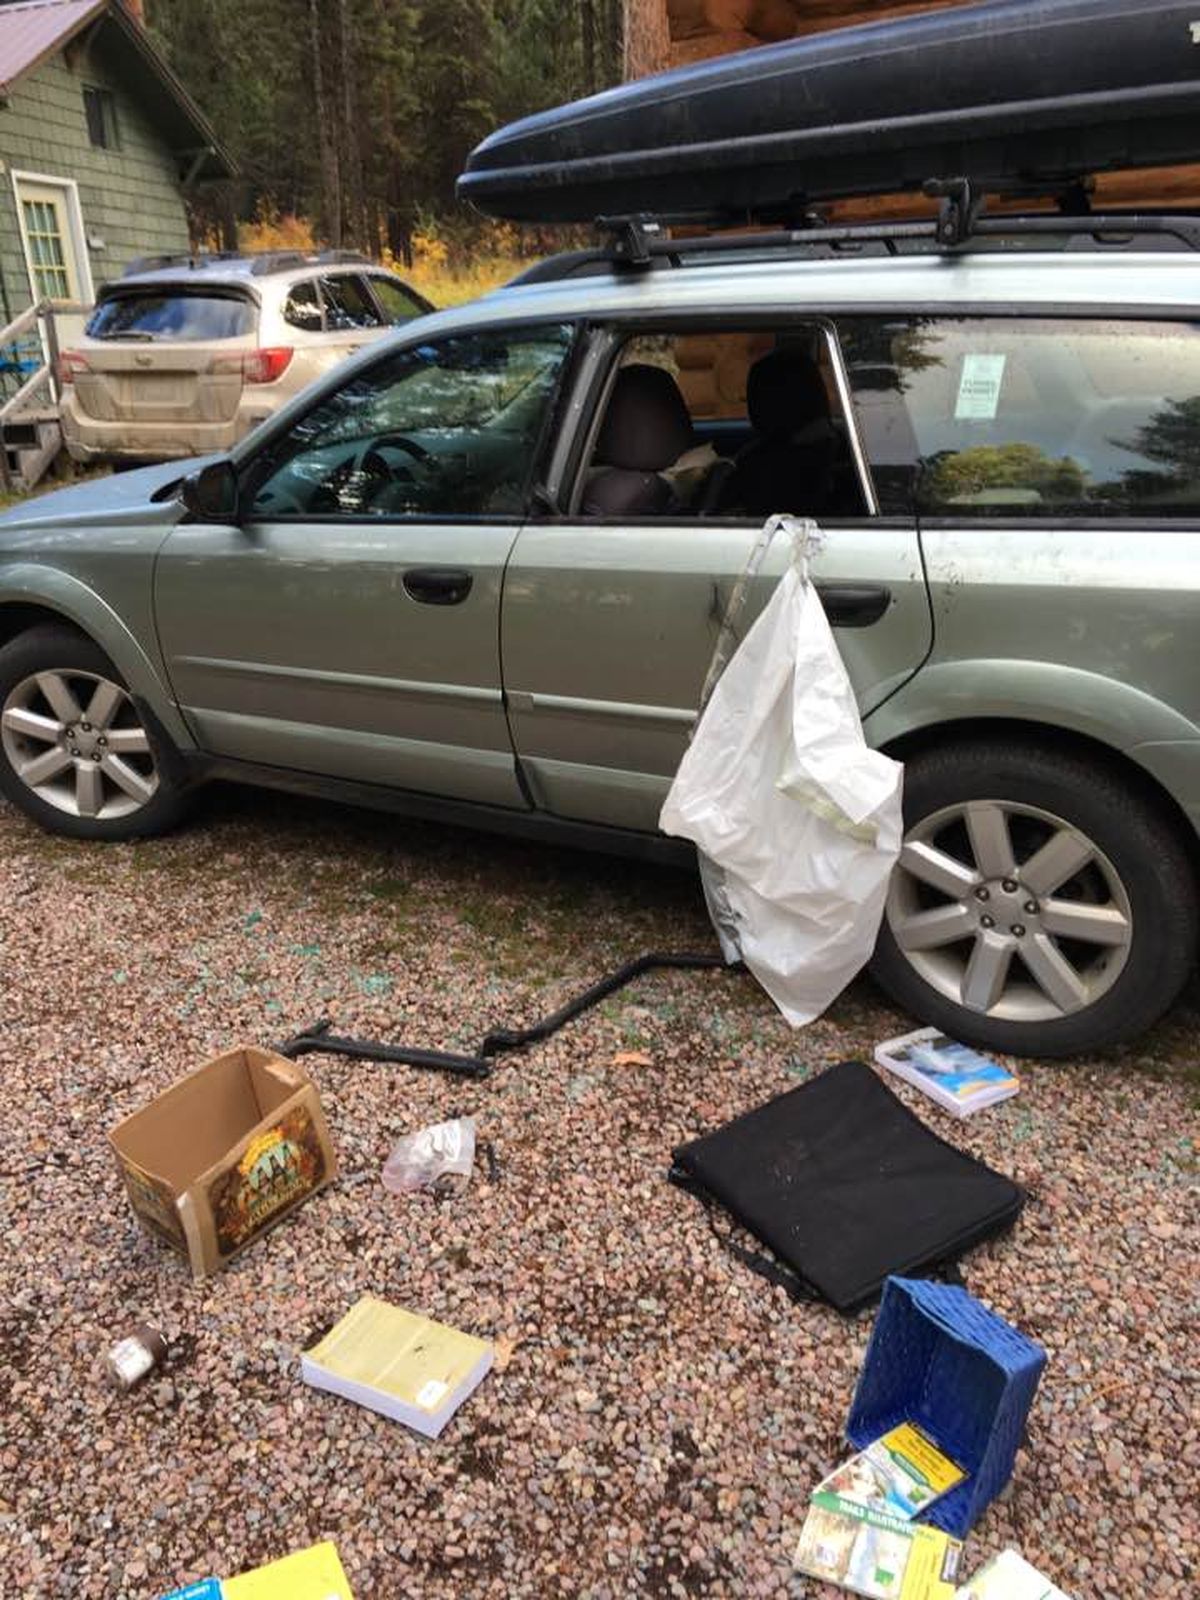 A black bear broke out a window and ravaged the insides of a Subaru near Seeley Lake, MT, for a few food items left inside. (Rich Landers)